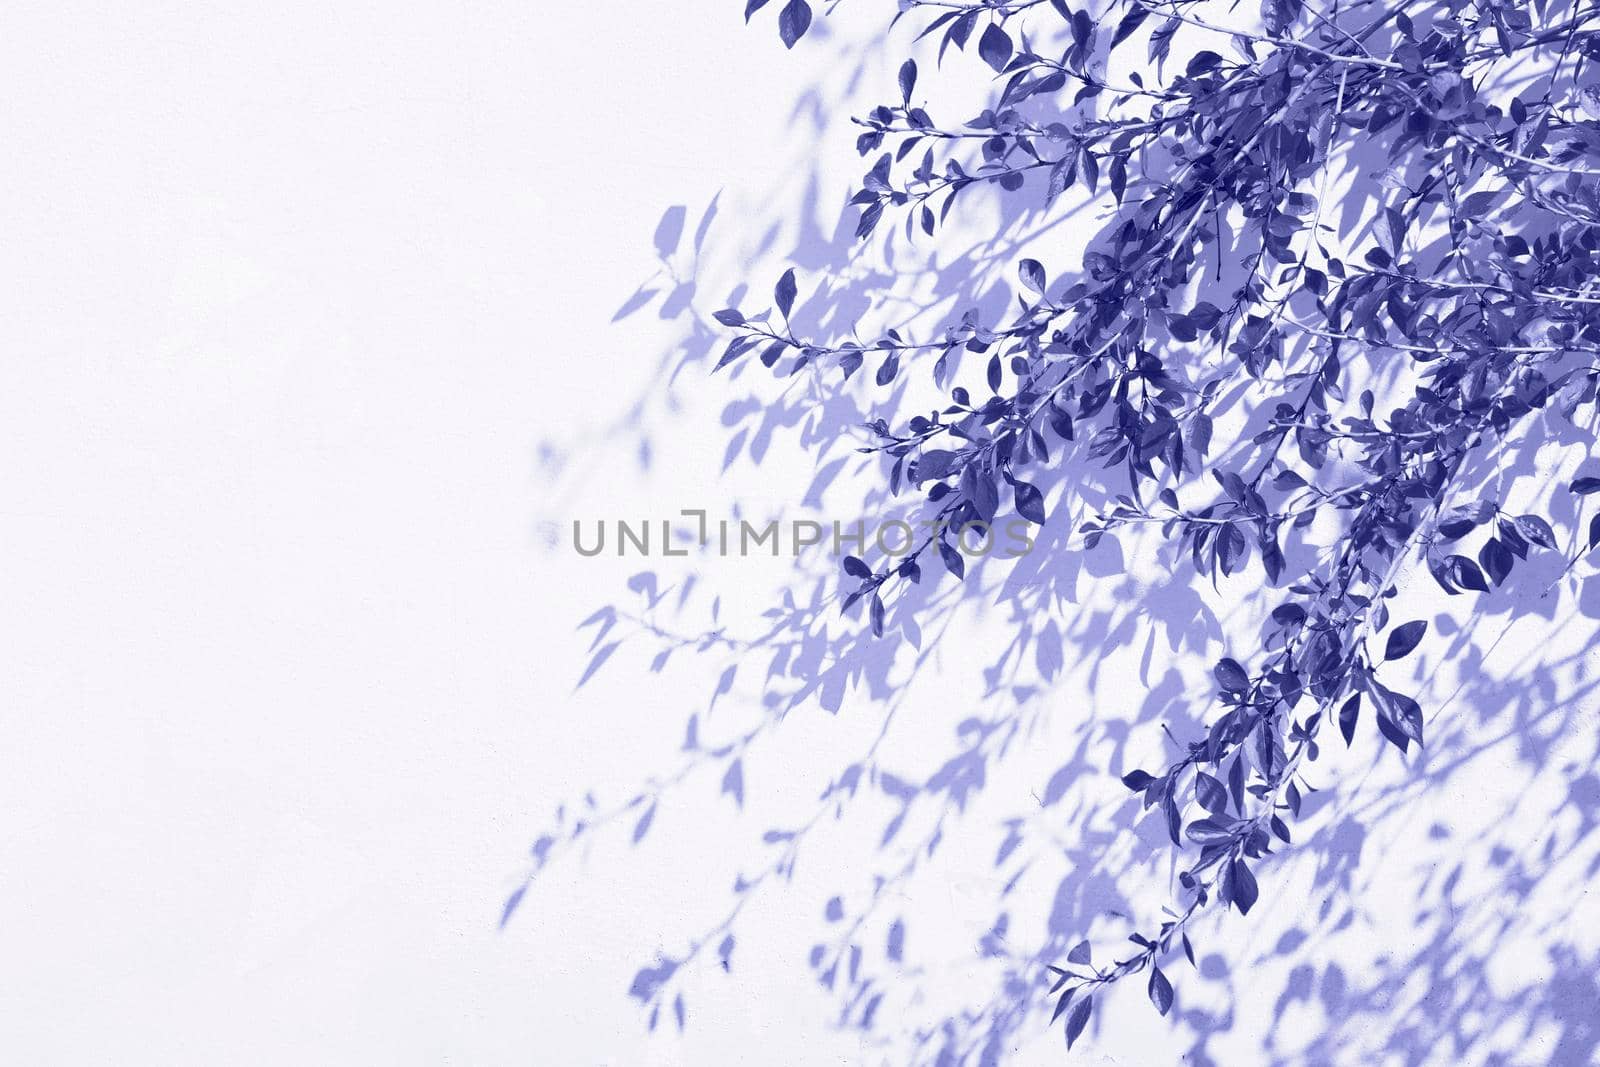 Very peri toned leaves background with shadow on white colour wall. Trendy color leaves background with copy space.